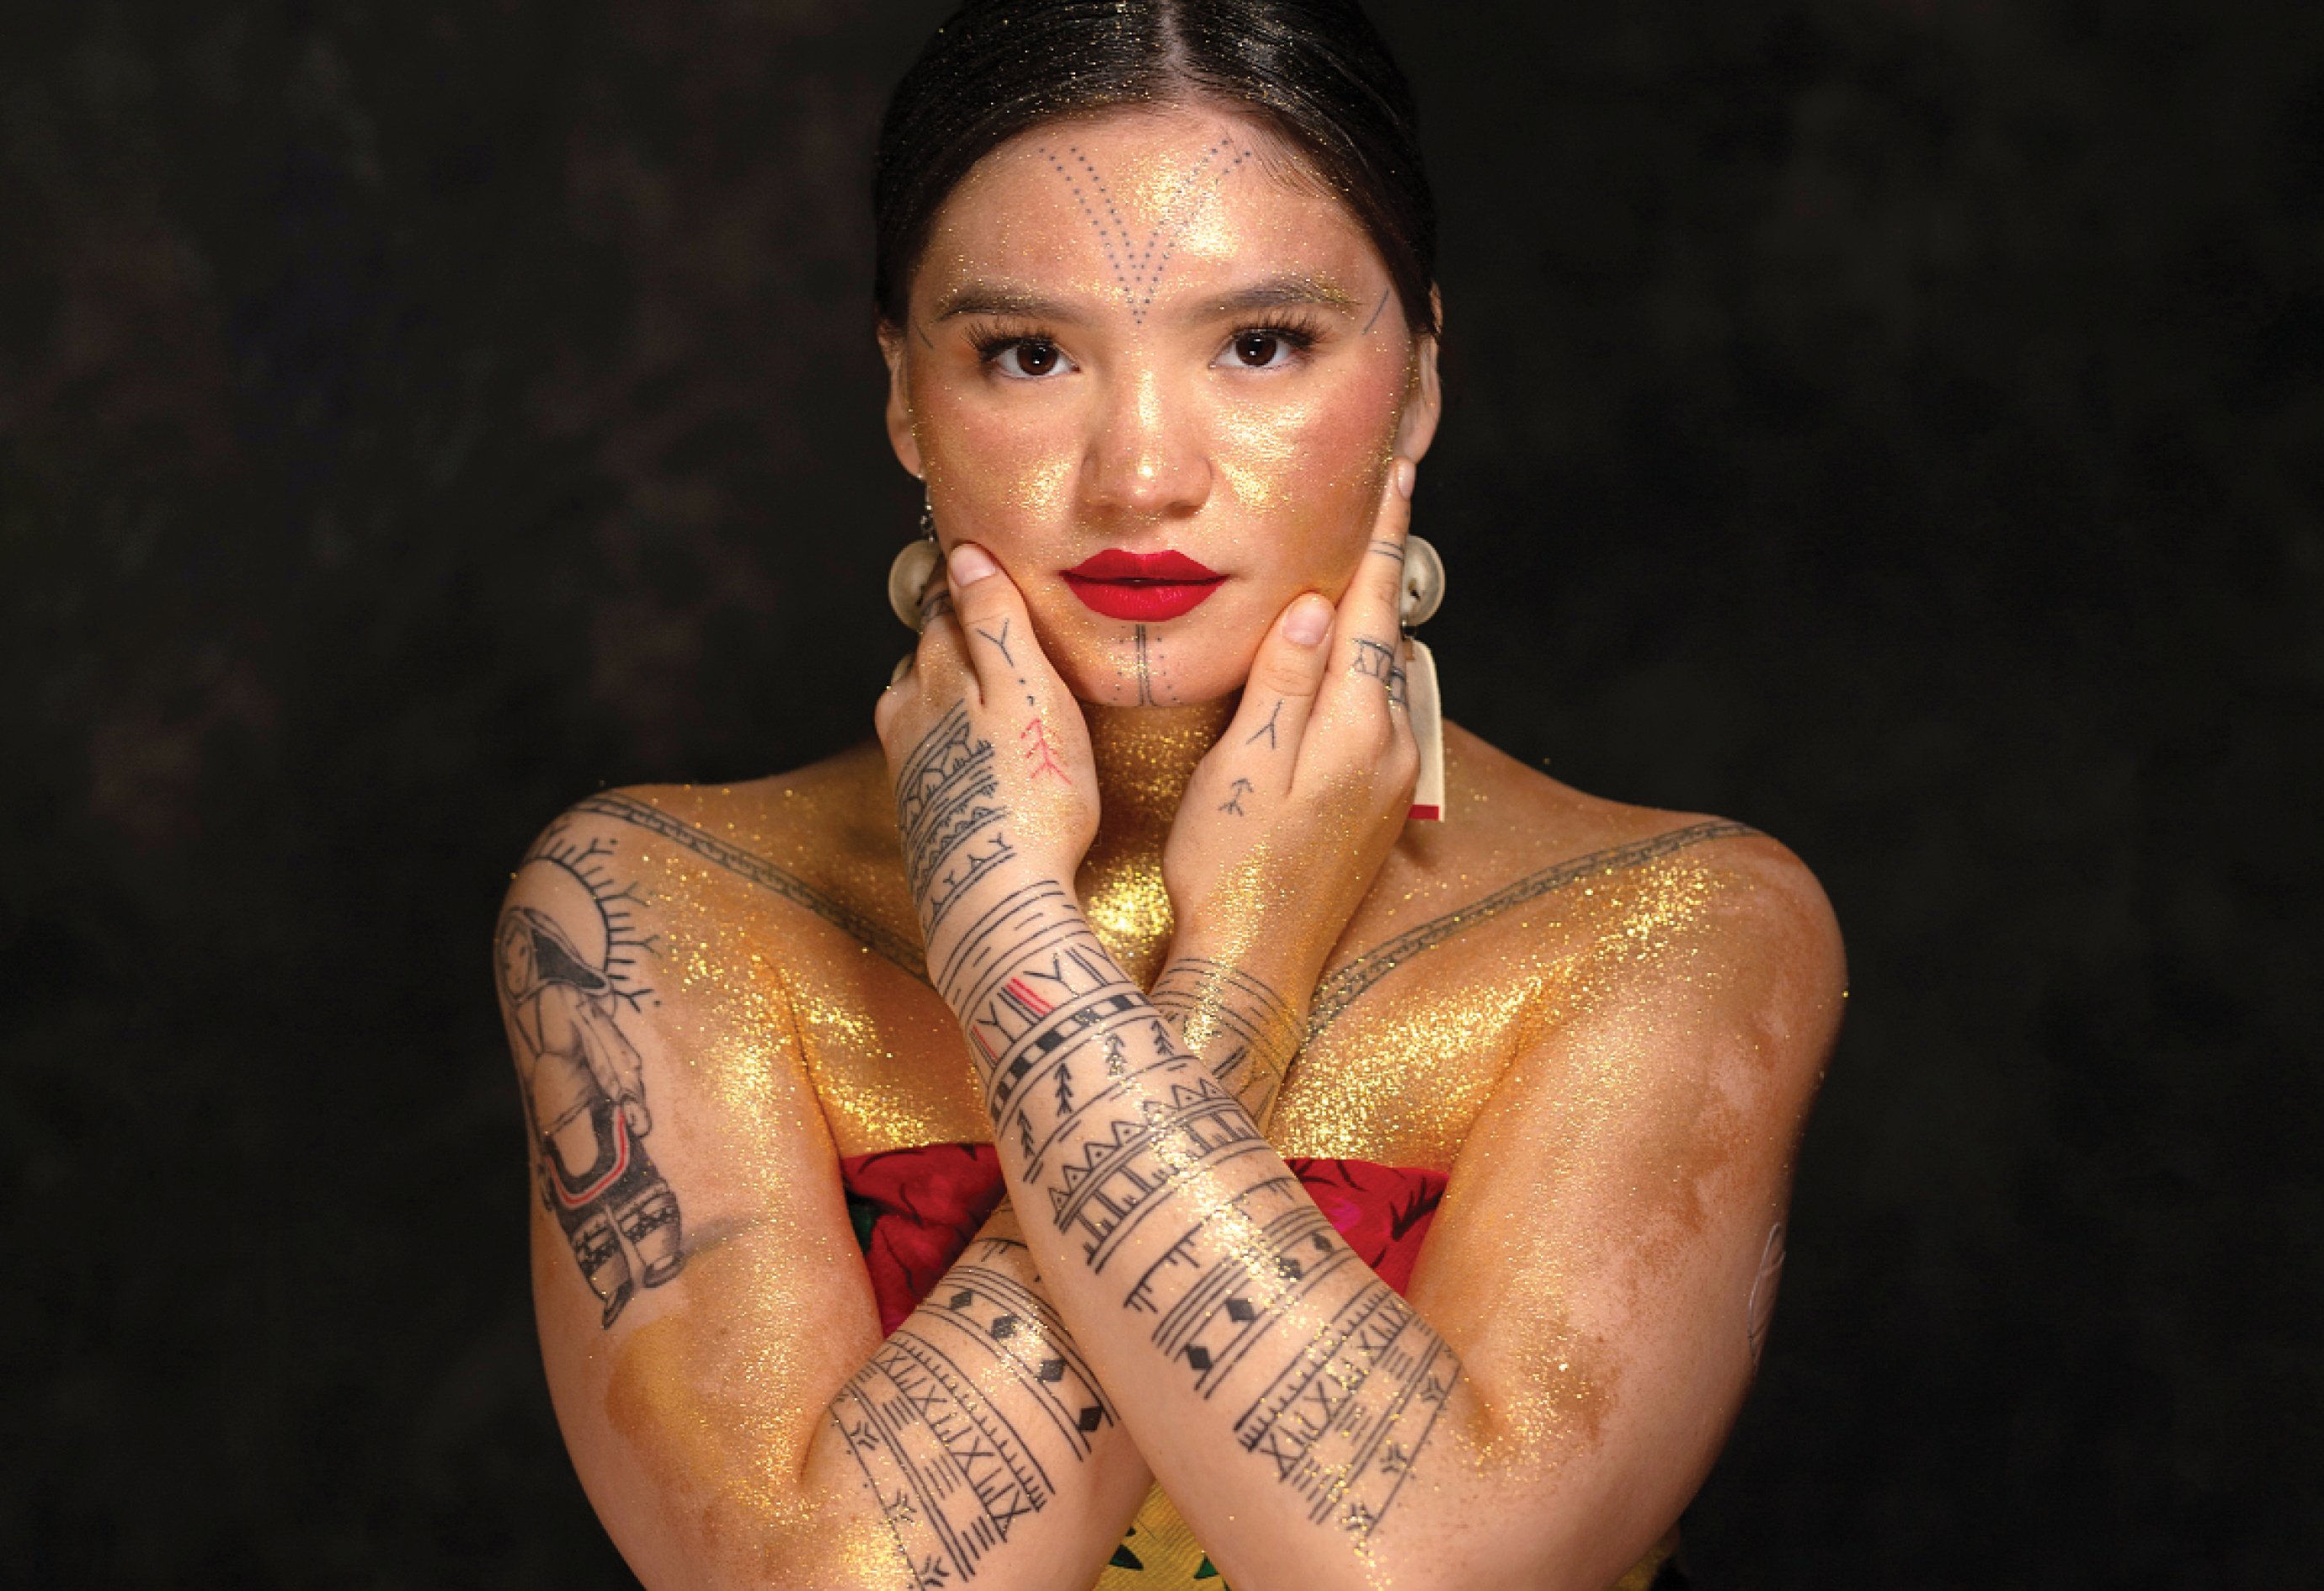 Arsaniq Deer poses with her traditional tattoos: “I’m proud to wear my markings,” she says. (Photo: Cora DeVos)